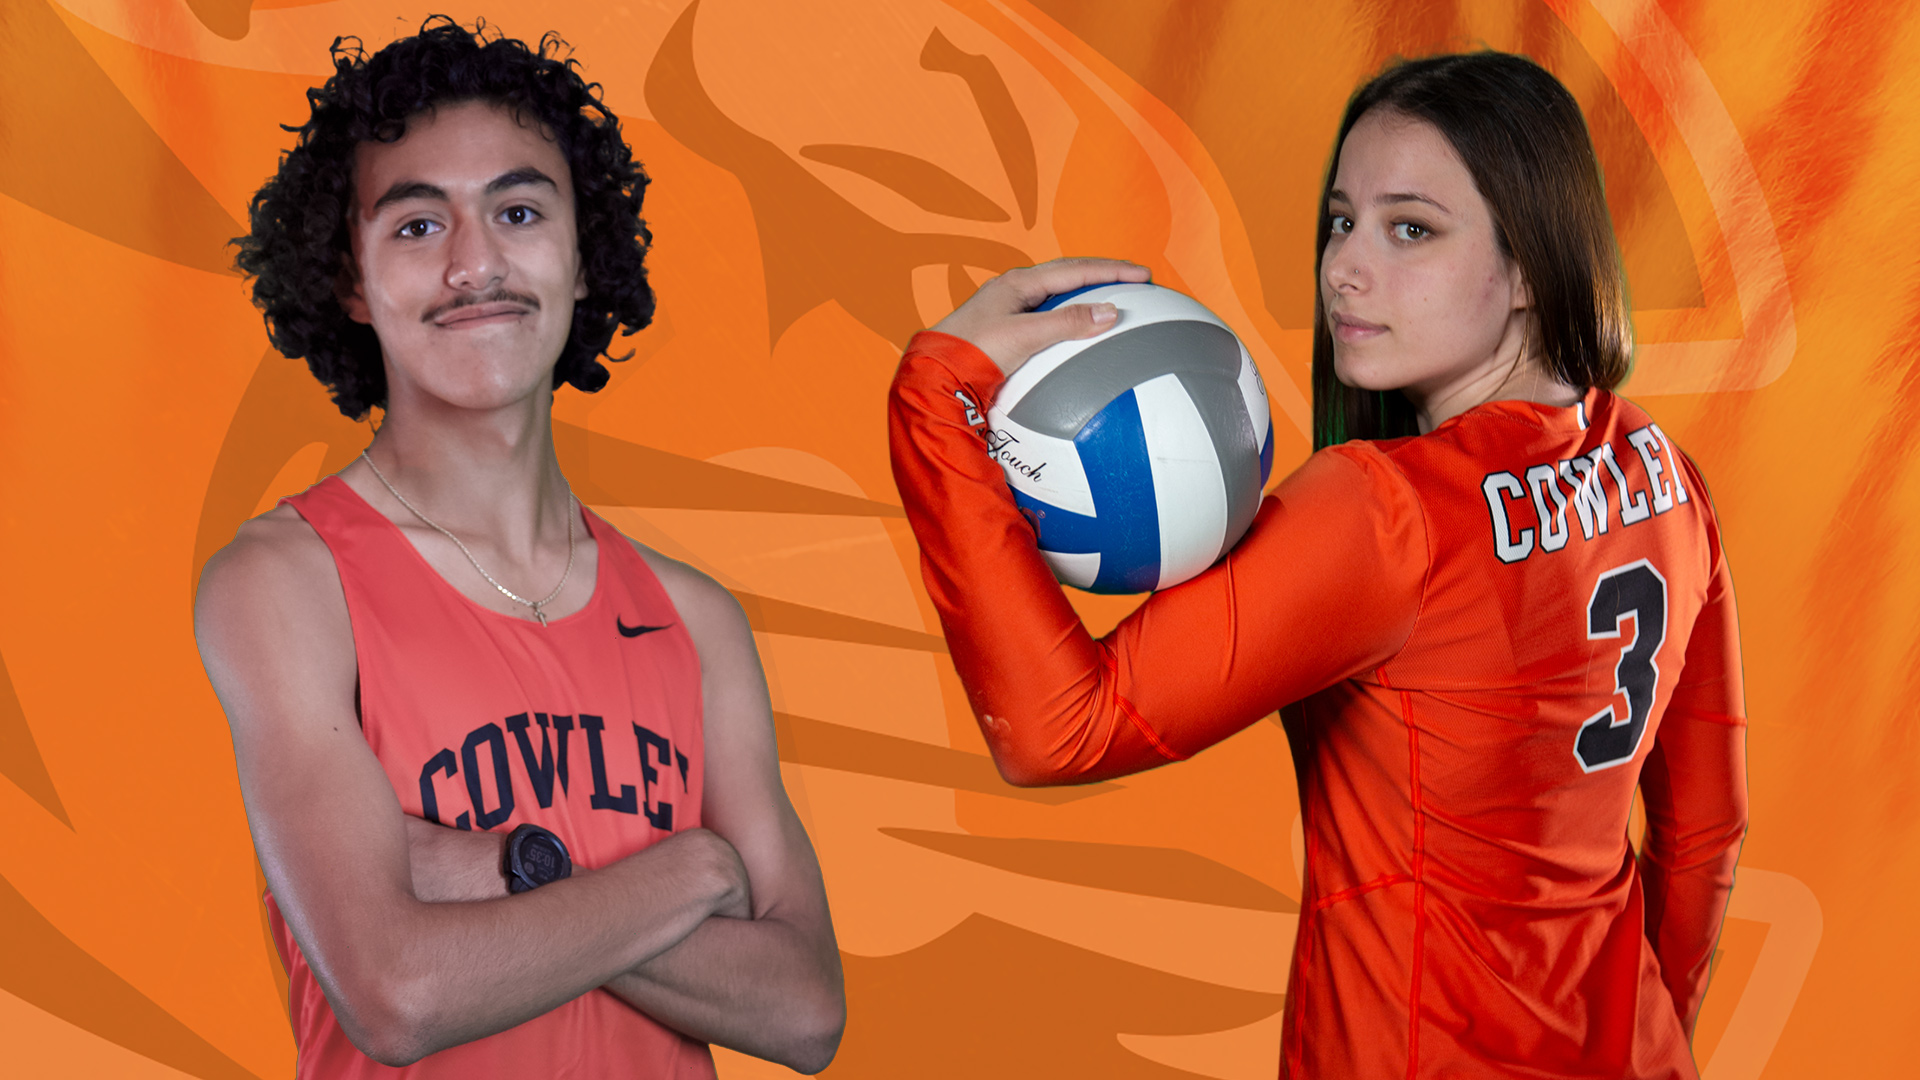 Cowley announces August Athletes of the Month